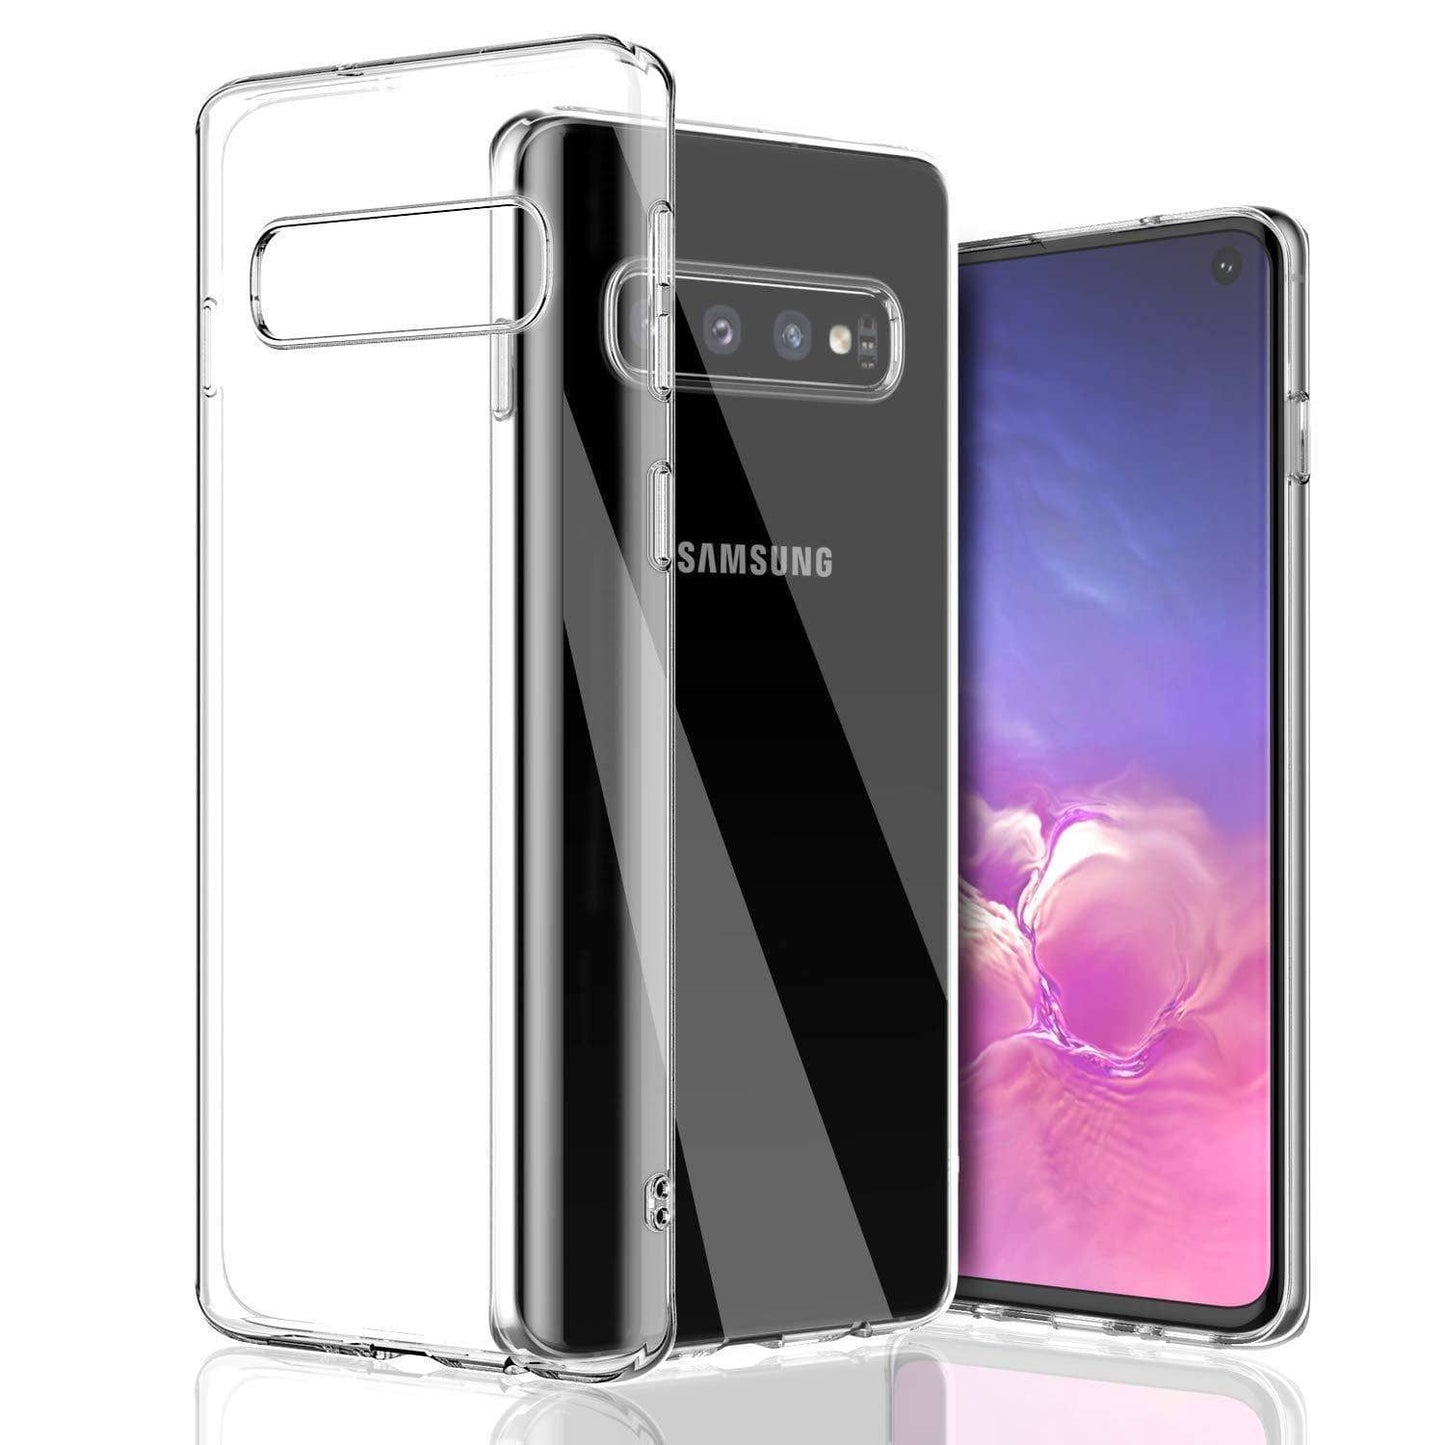 Samsung Galaxy S10 S10+ S10e Clear Rubber Back Case 1.5mm Thick Protective Skin-Phone Case Clear Rubber-Goospery-www.PhoneGuy.com.au